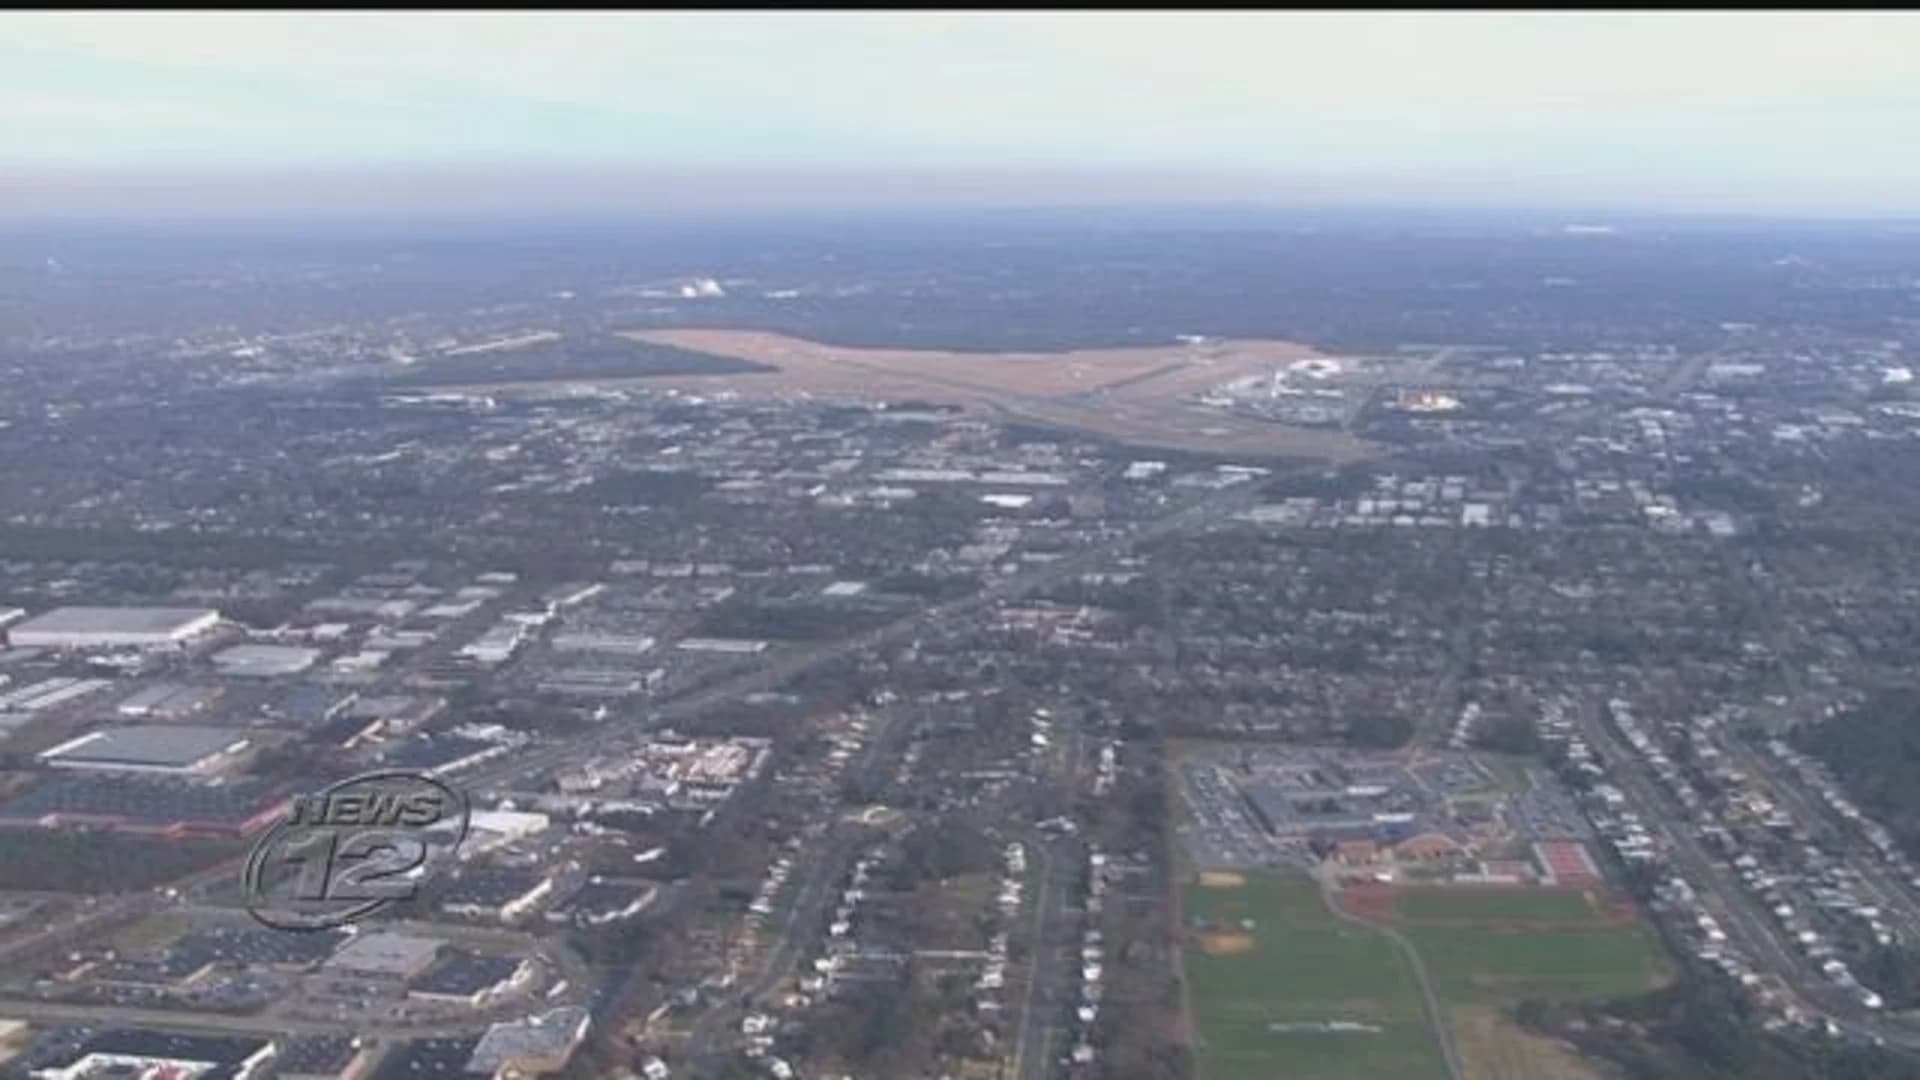 MacArthur Airport may be added to list of Superfund sites